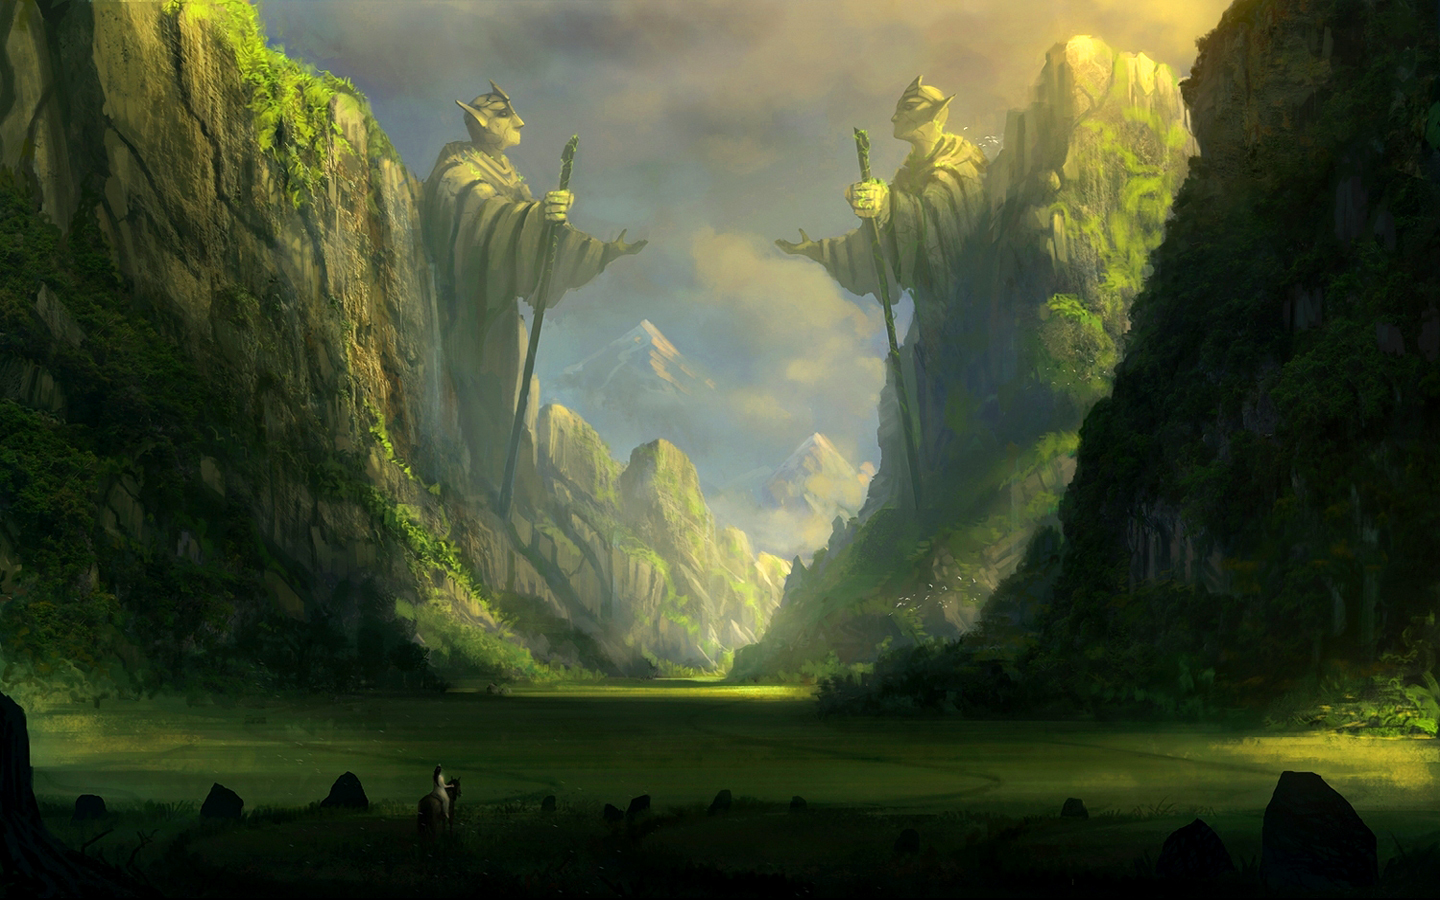 The Ancient Valley